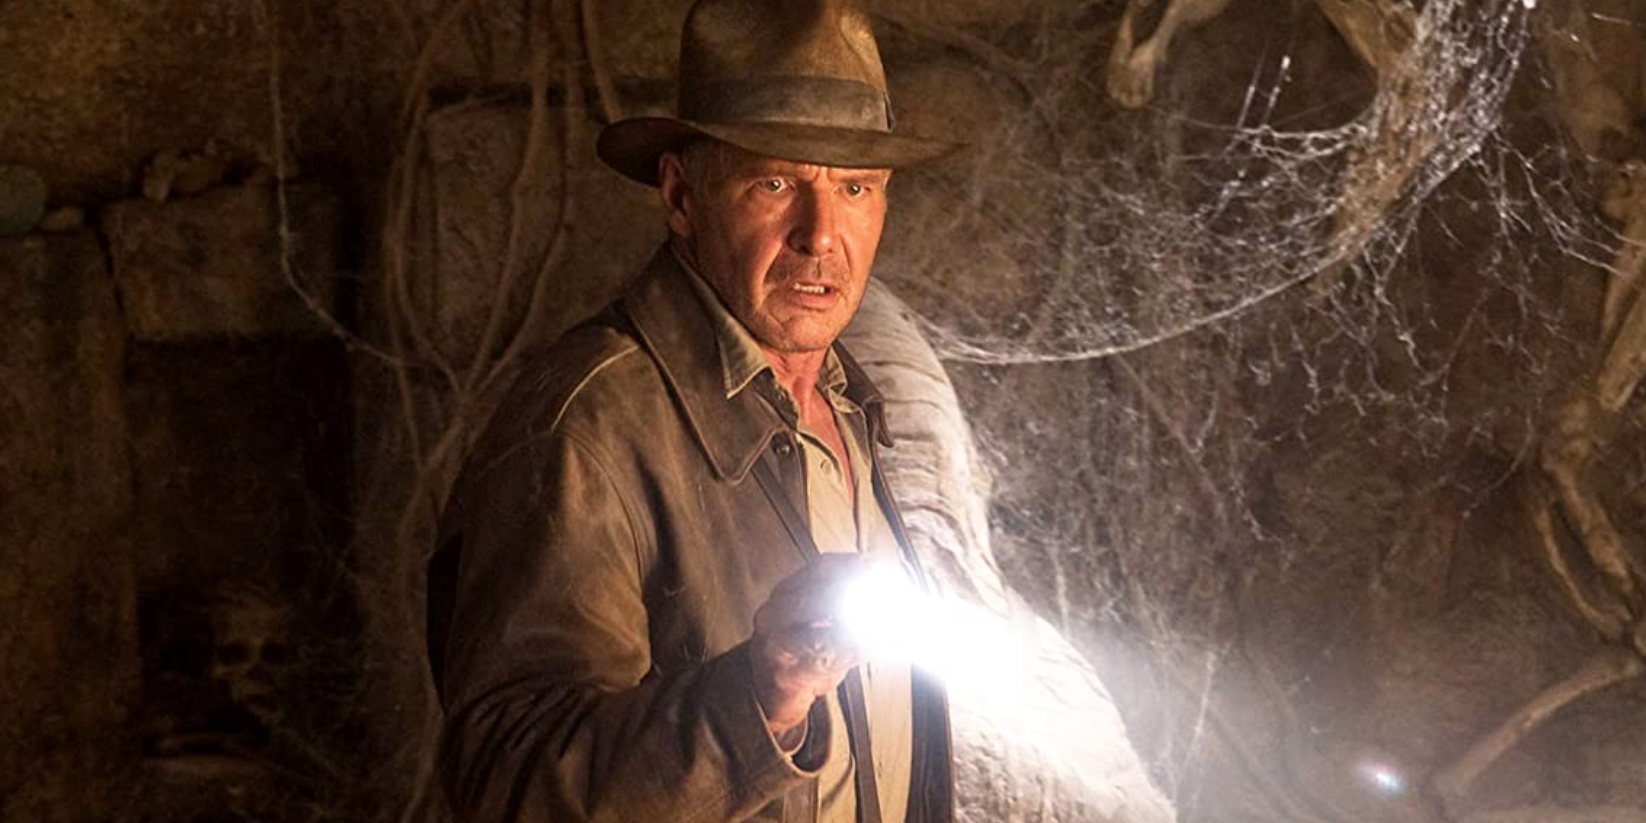 Indiana-Jones-and-the-kingdom-of-crystals-skull-Harrison-Ford